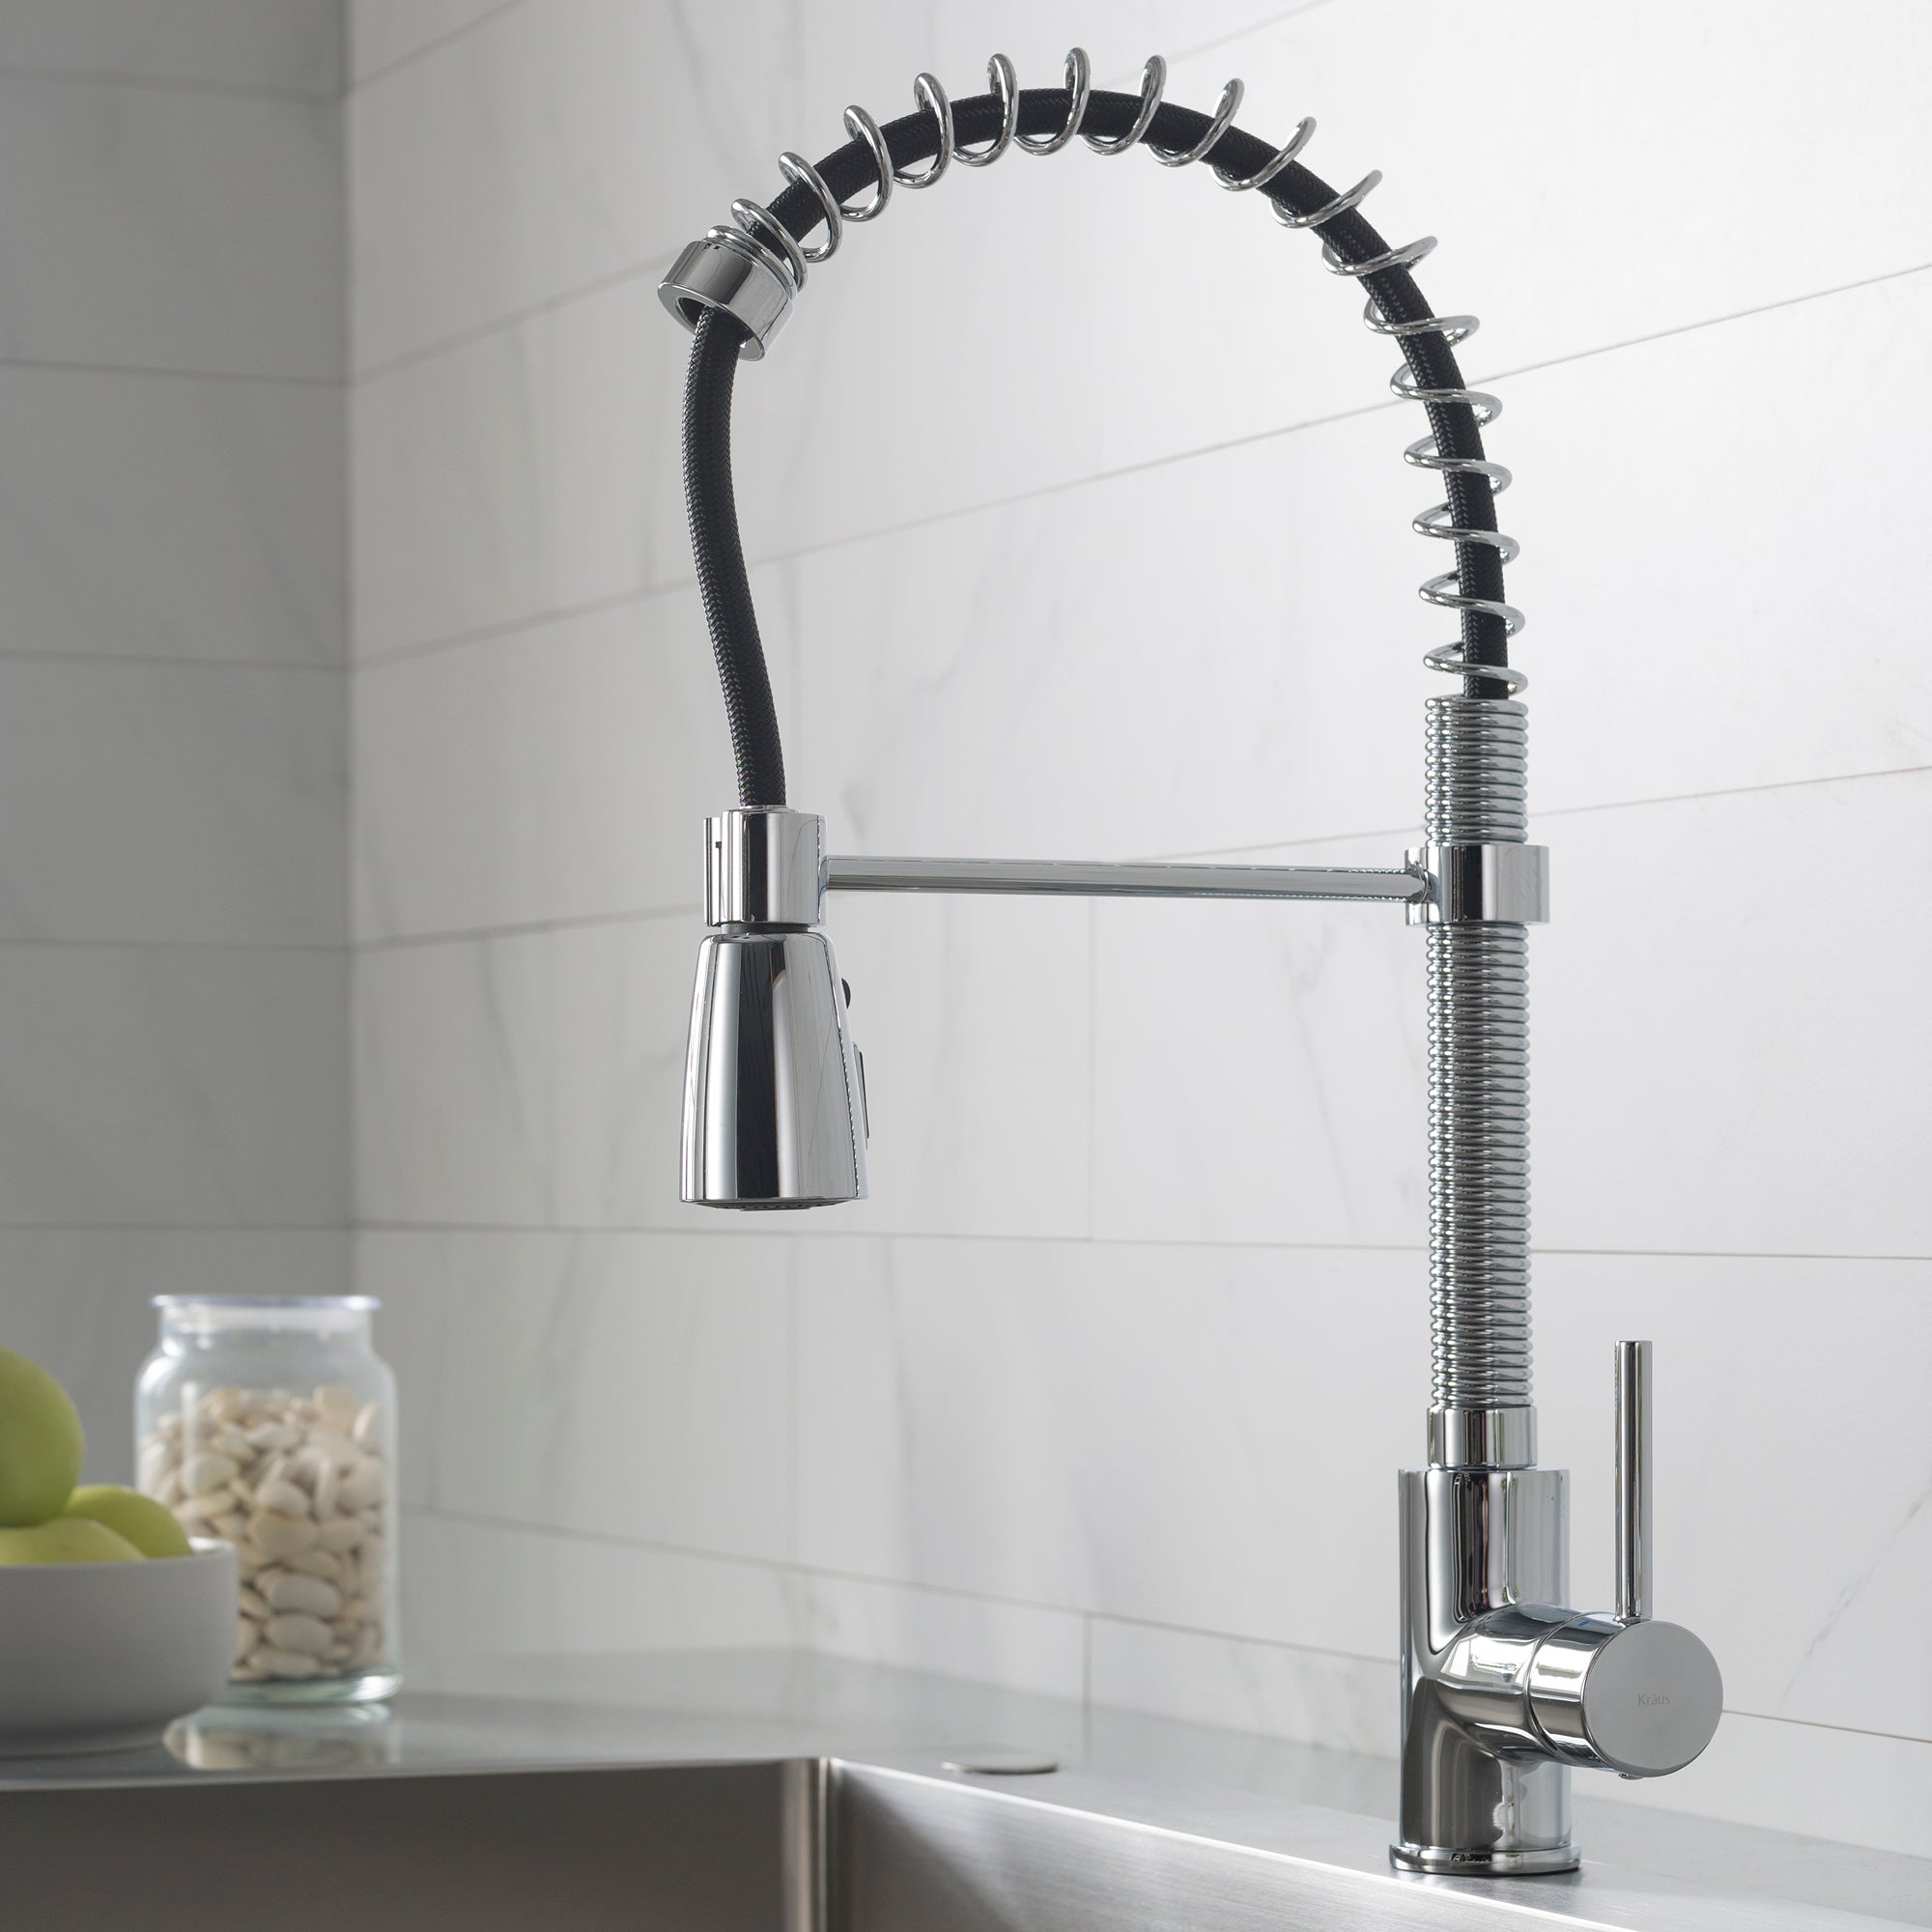 Kraus Commercial Style Kitchen Faucet with Spring Spout and 3-Function Pull-Down Sprayer